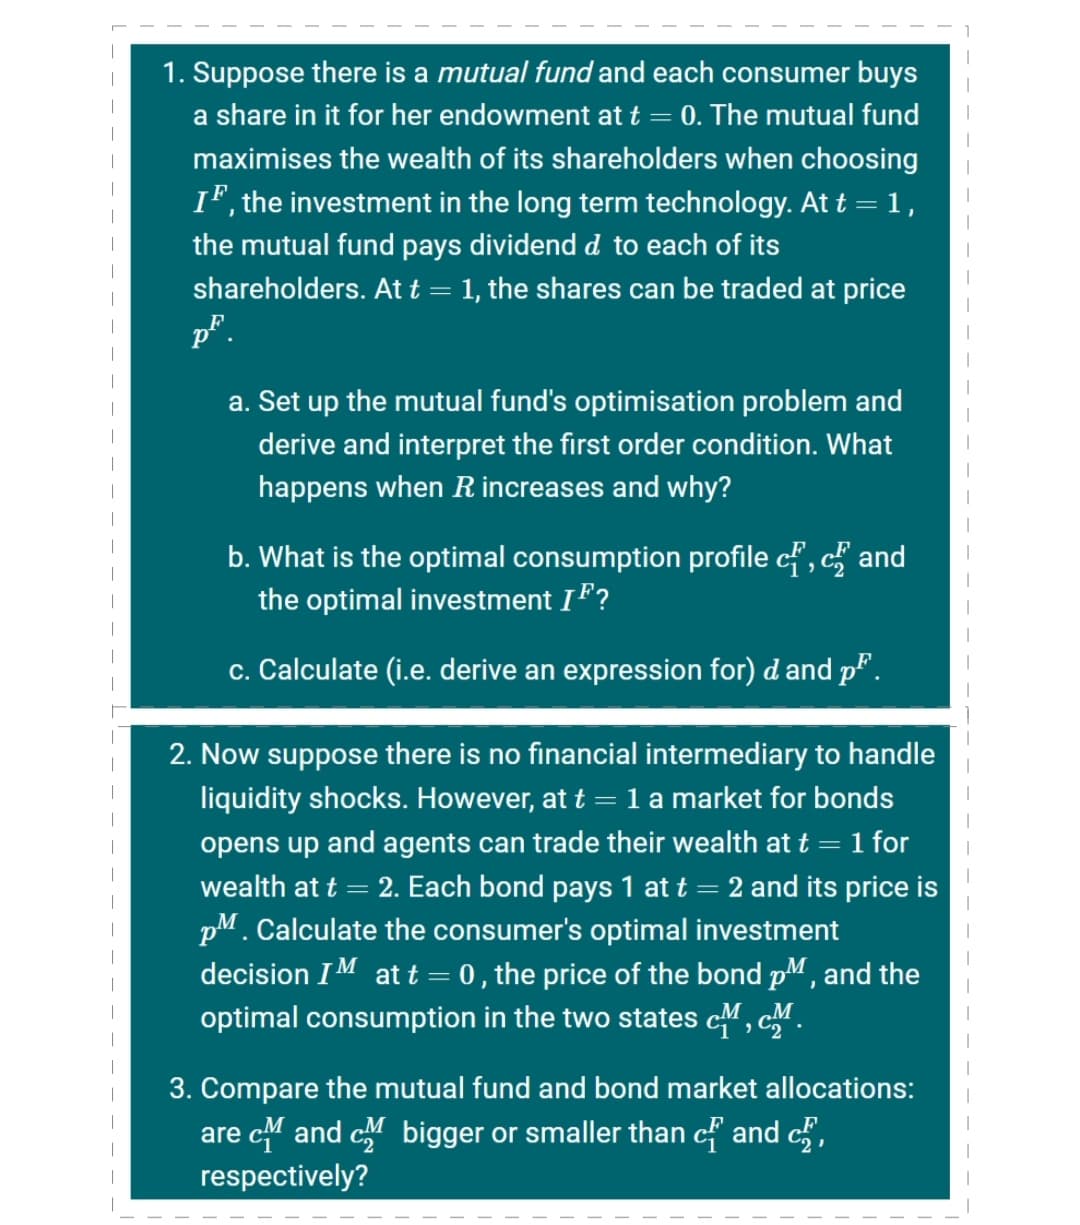 1. Suppose there is a mutual fund and each consumer buys
|
a share in it for her endowment at t = 0. The mutual fund
maximises the wealth of its shareholders when choosing
IF, the investment in the long term technology. At t =1,
the mutual fund pays dividend d to each of its
shareholders. At t = 1, the shares can be traded at price
p*.
a. Set up the mutual fund's optimisation problem and
derive and interpret the first order condition. What
happens when R increases and why?
b. What is the optimal consumption profile cf , c and
the optimal investment IF?
|
c. Calculate (i.e. derive an expression for) d and p.
2. Now suppose there is no financial intermediary to handle
liquidity shocks. However, at t = 1 a market for bonds
opens up and agents can trade their wealth at t = 1 for
|
wealth at t
2. Each bond pays 1 at t = 2 and its price is
pM. Calculate the consumer's optimal investment
decision IM at t = 0 , the price of the bond pM, and the
optimal consumption in the two states cM, cM.
3. Compare the mutual fund and bond market allocations:
are c and c bigger or smaller than cf and c,
respectively?
